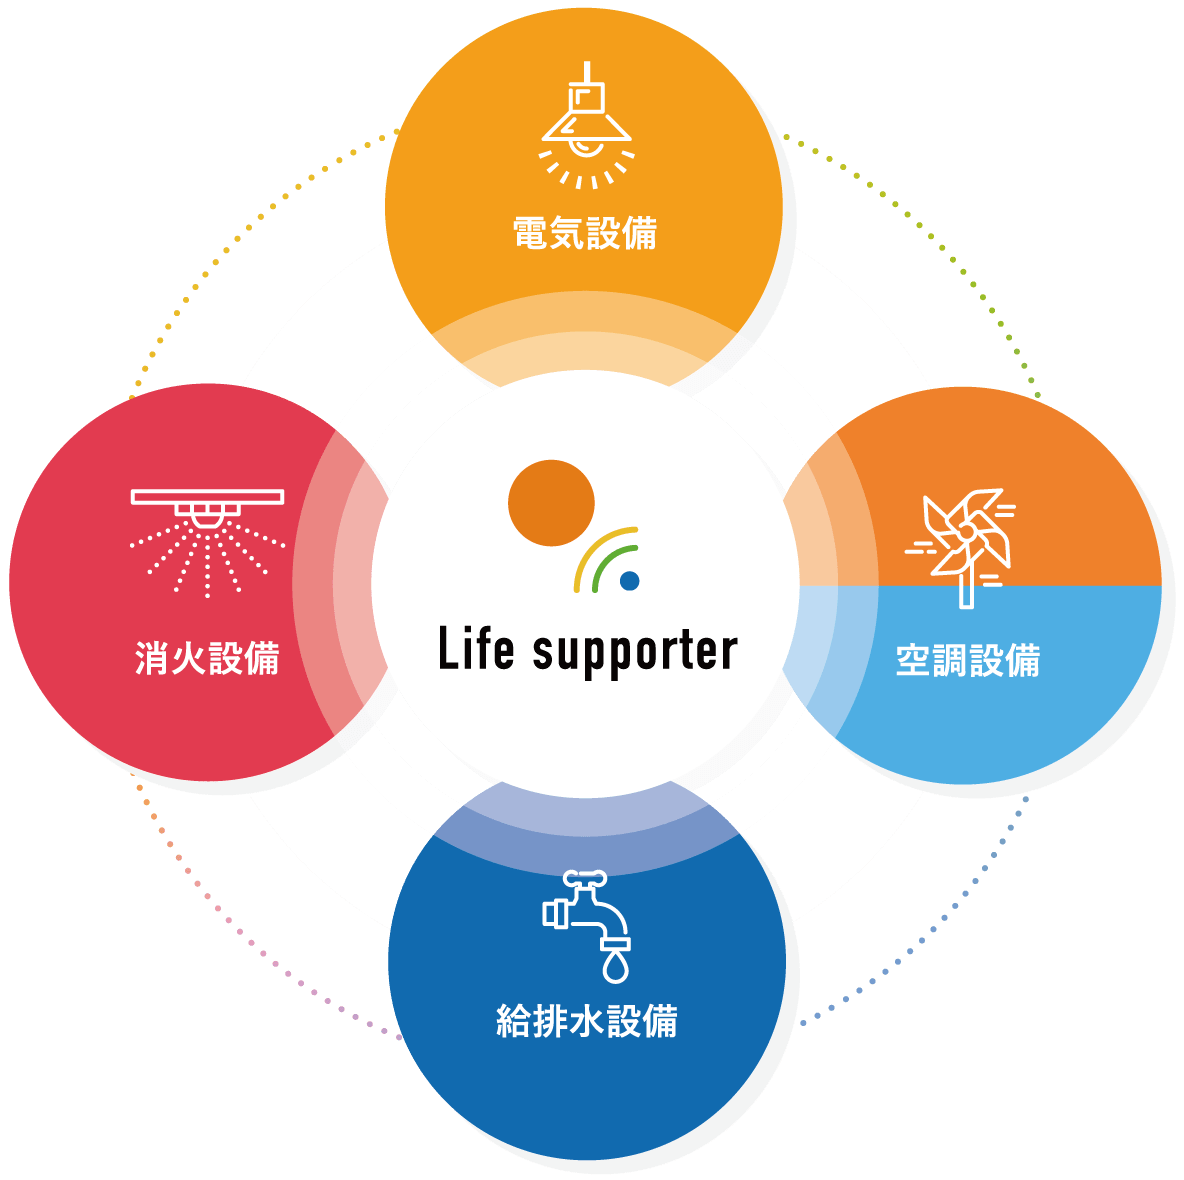 Life supporter